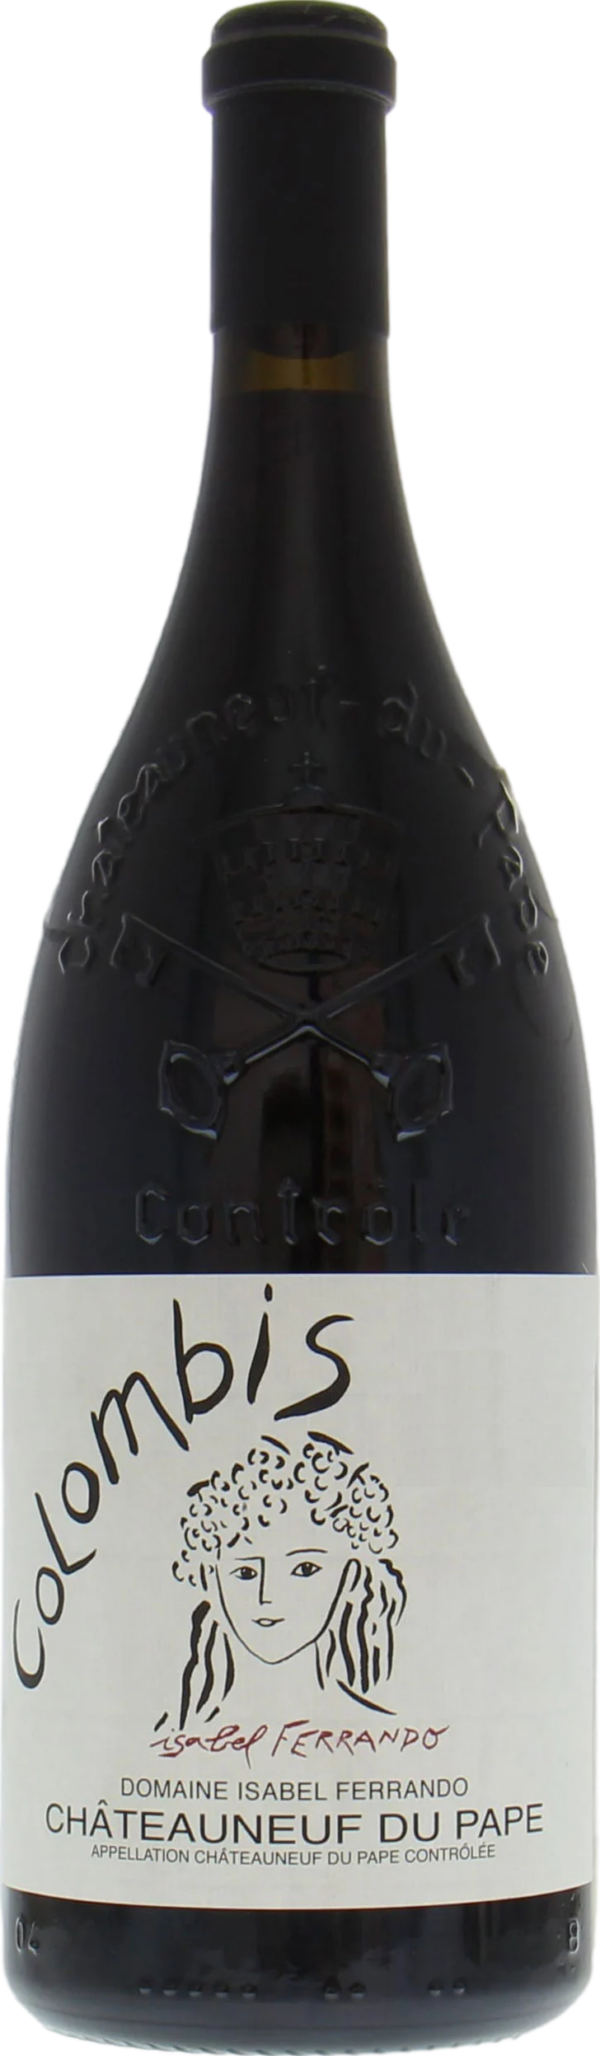 Product image of Domaine St Prefert Chateauneuf du Pape Colombis 2019 from 8wines